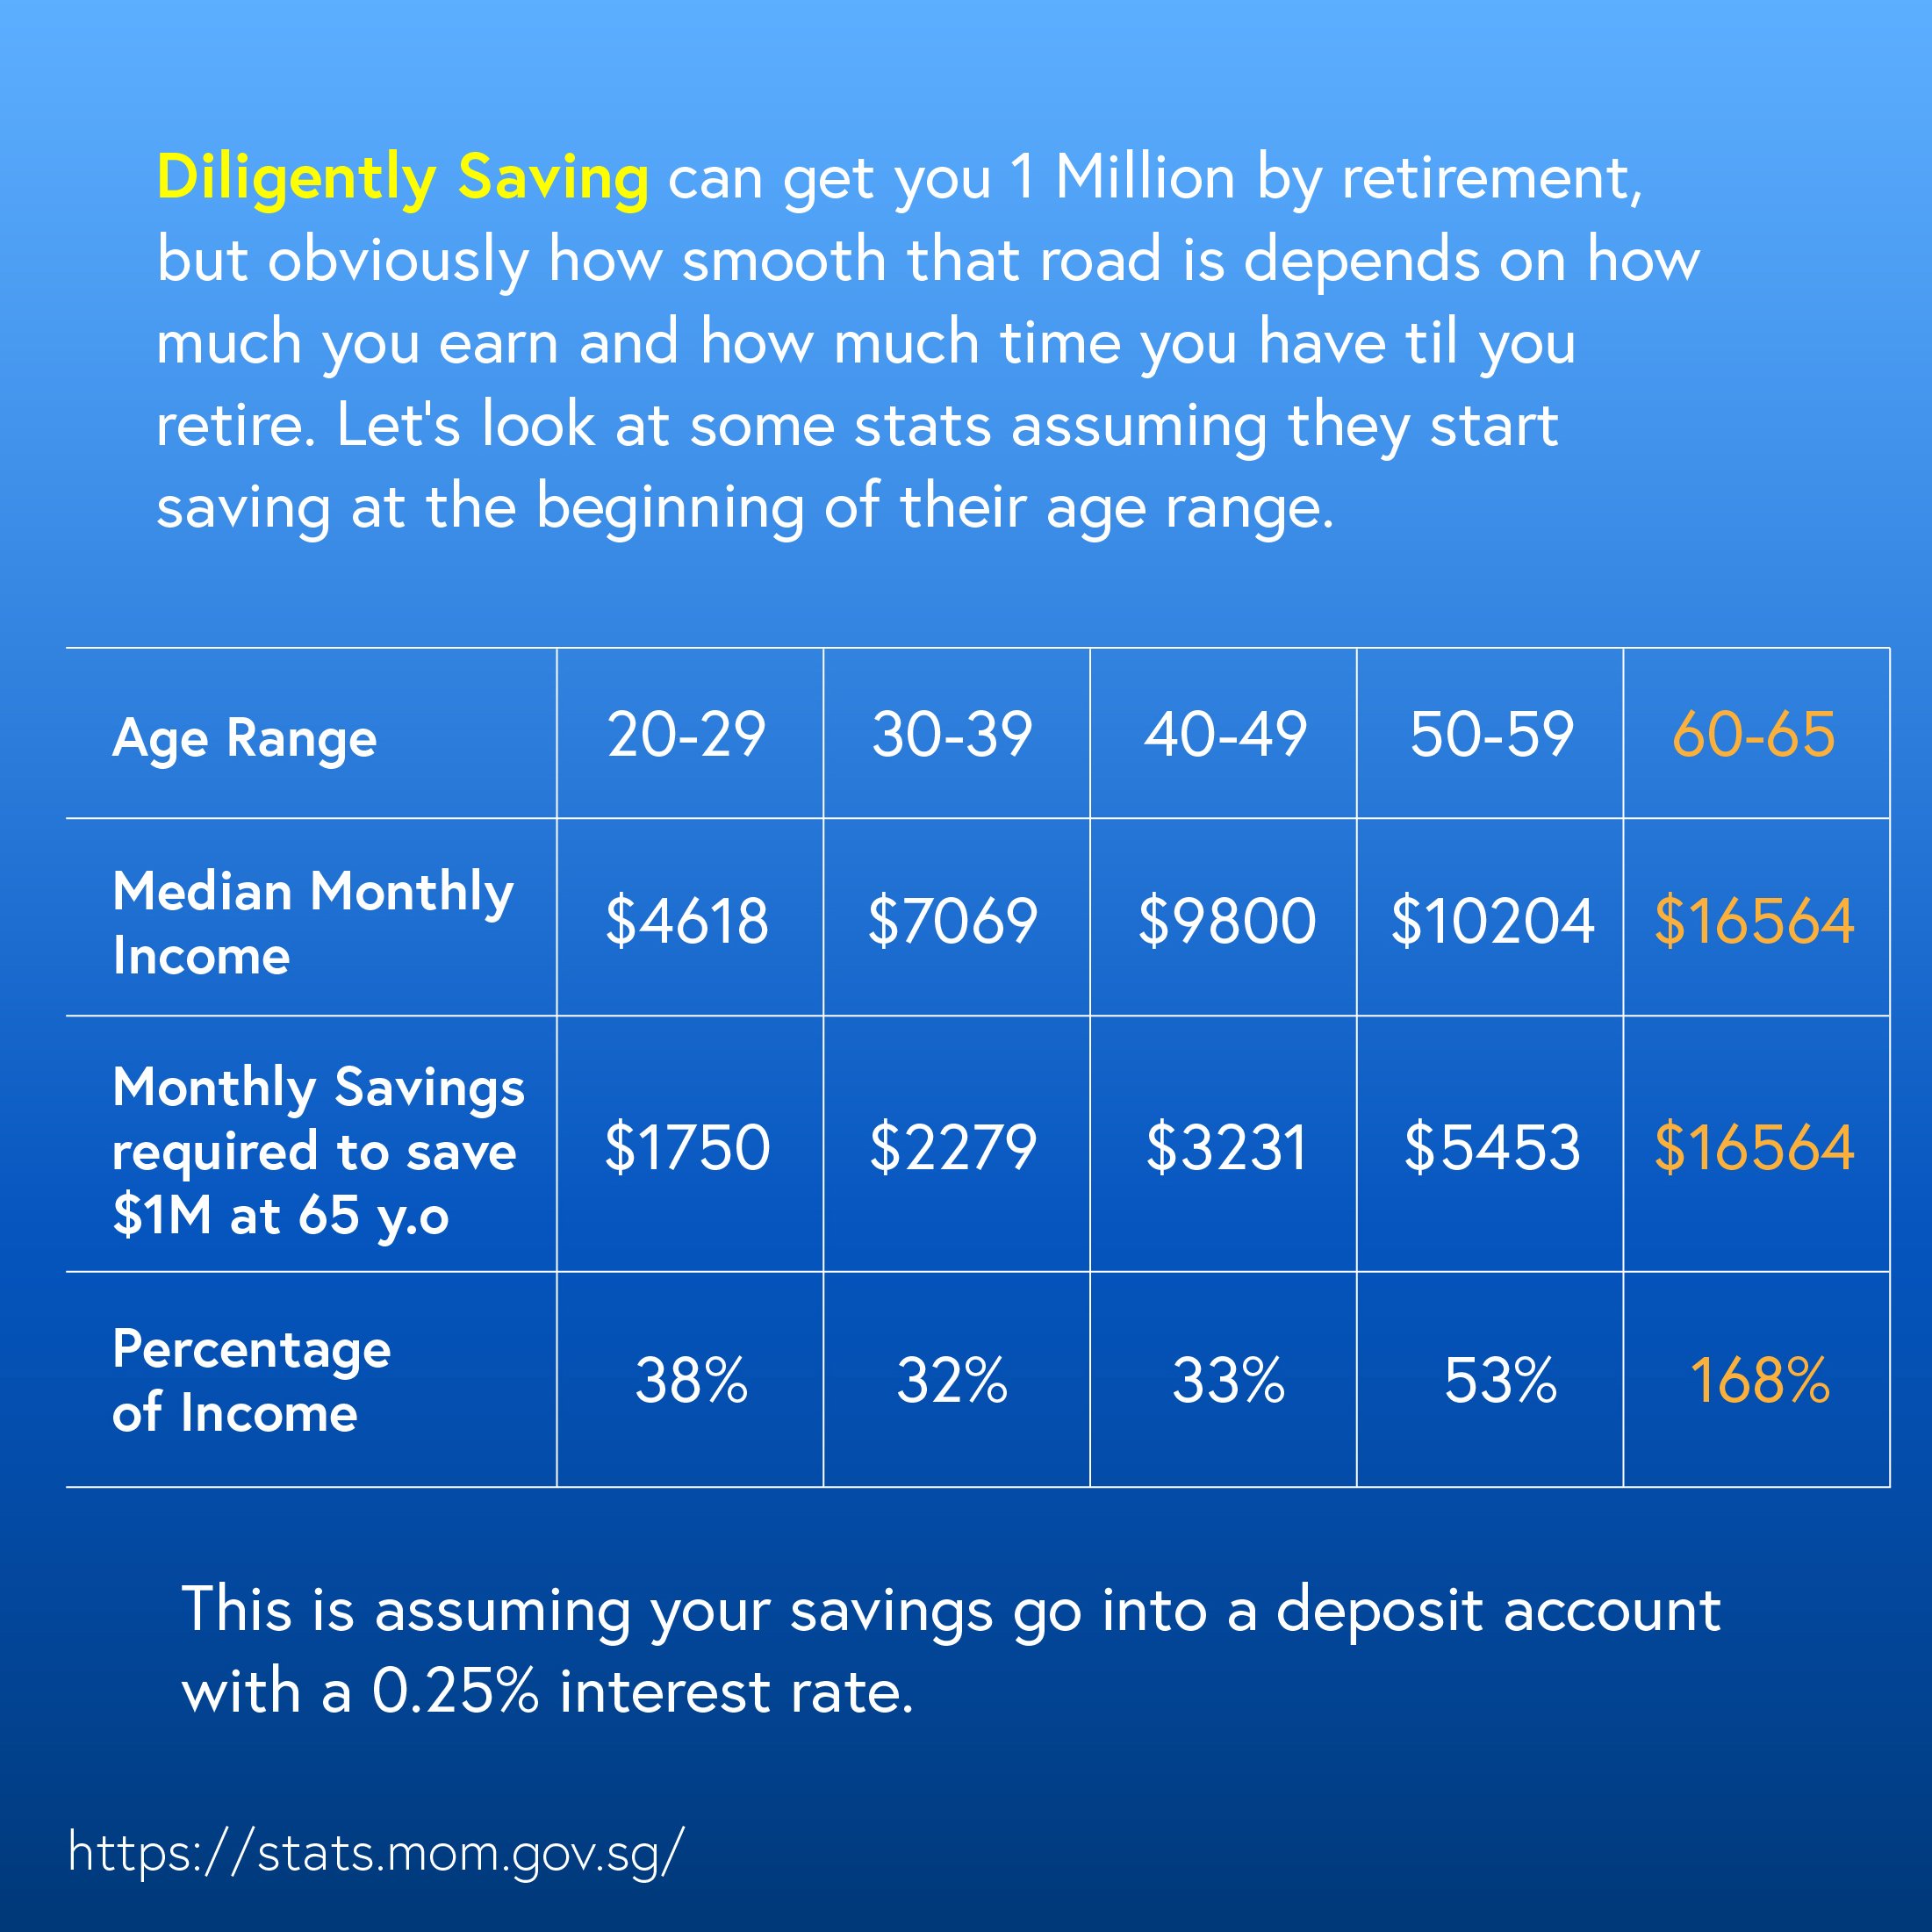 220110_1M by the time you retire-02.jpg